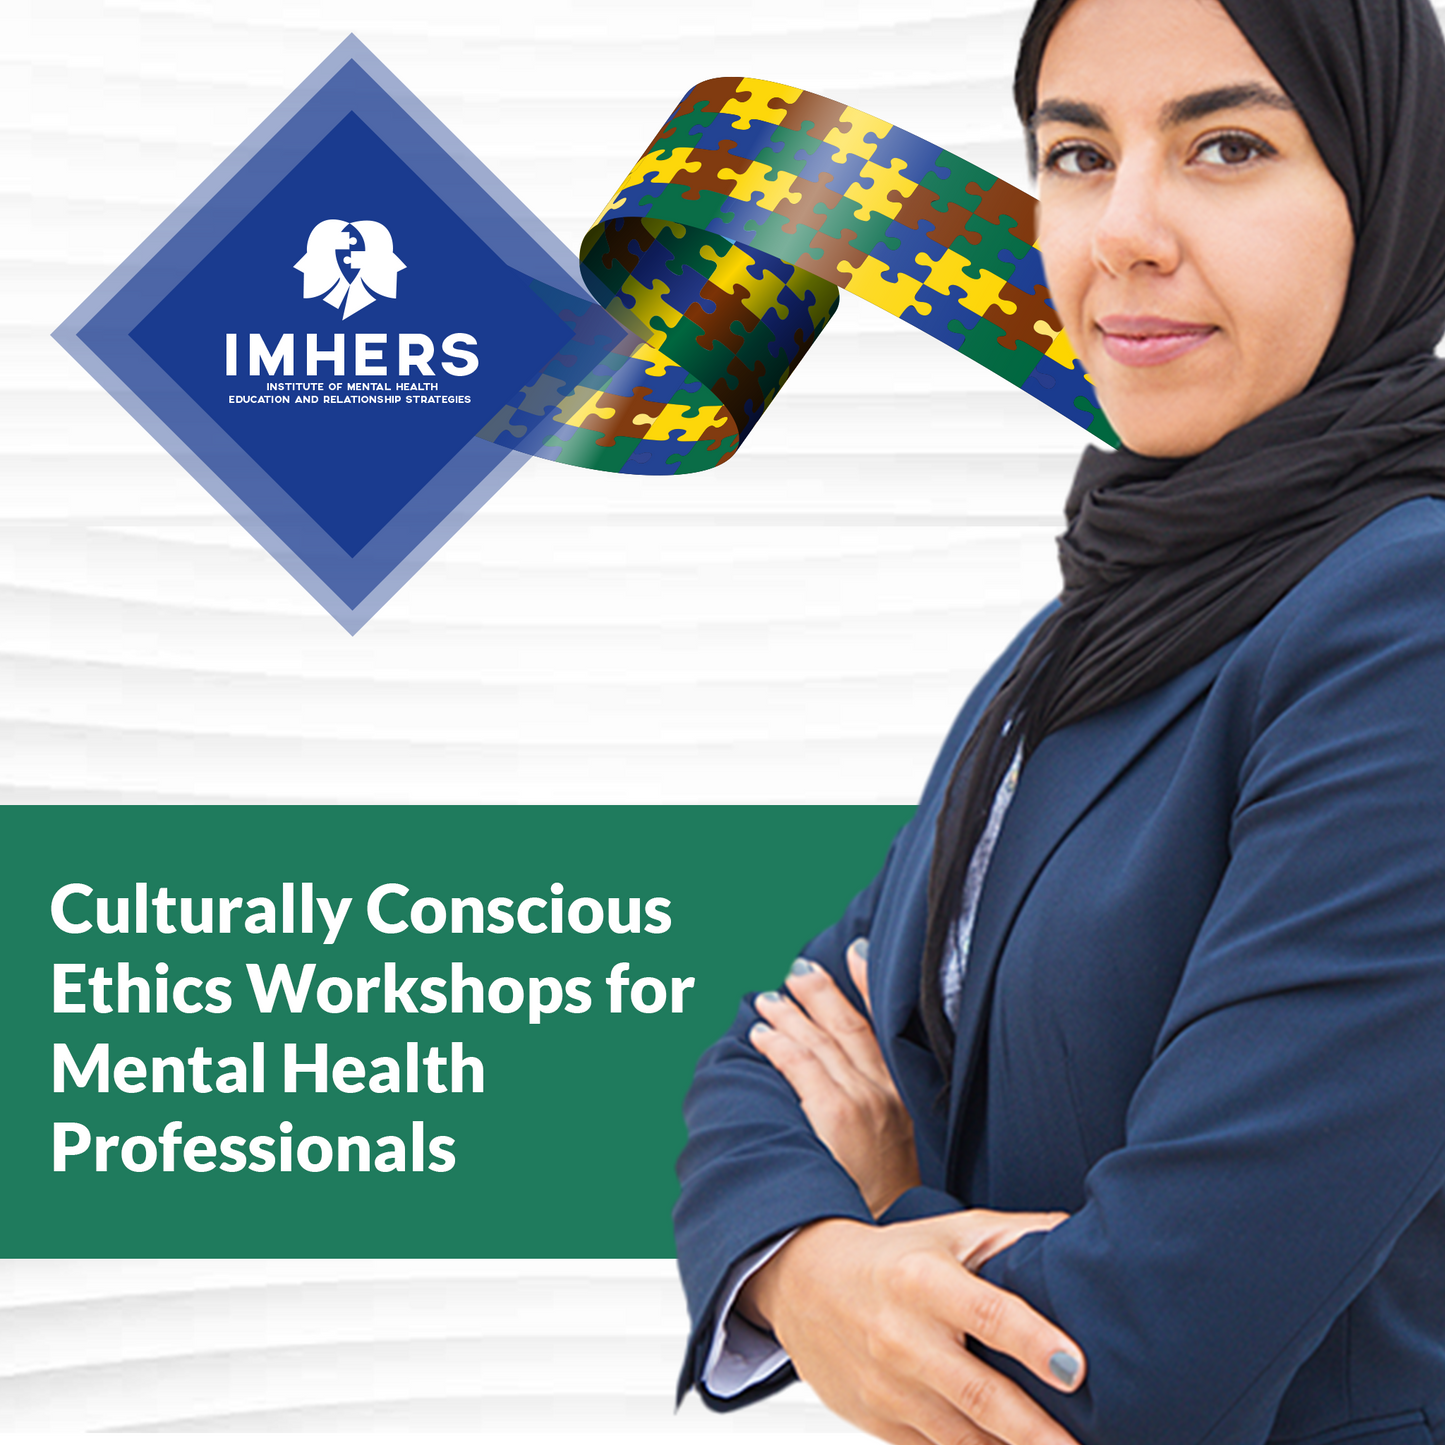 Culturally Conscious Ethics Workshops for Mental Health Professionals